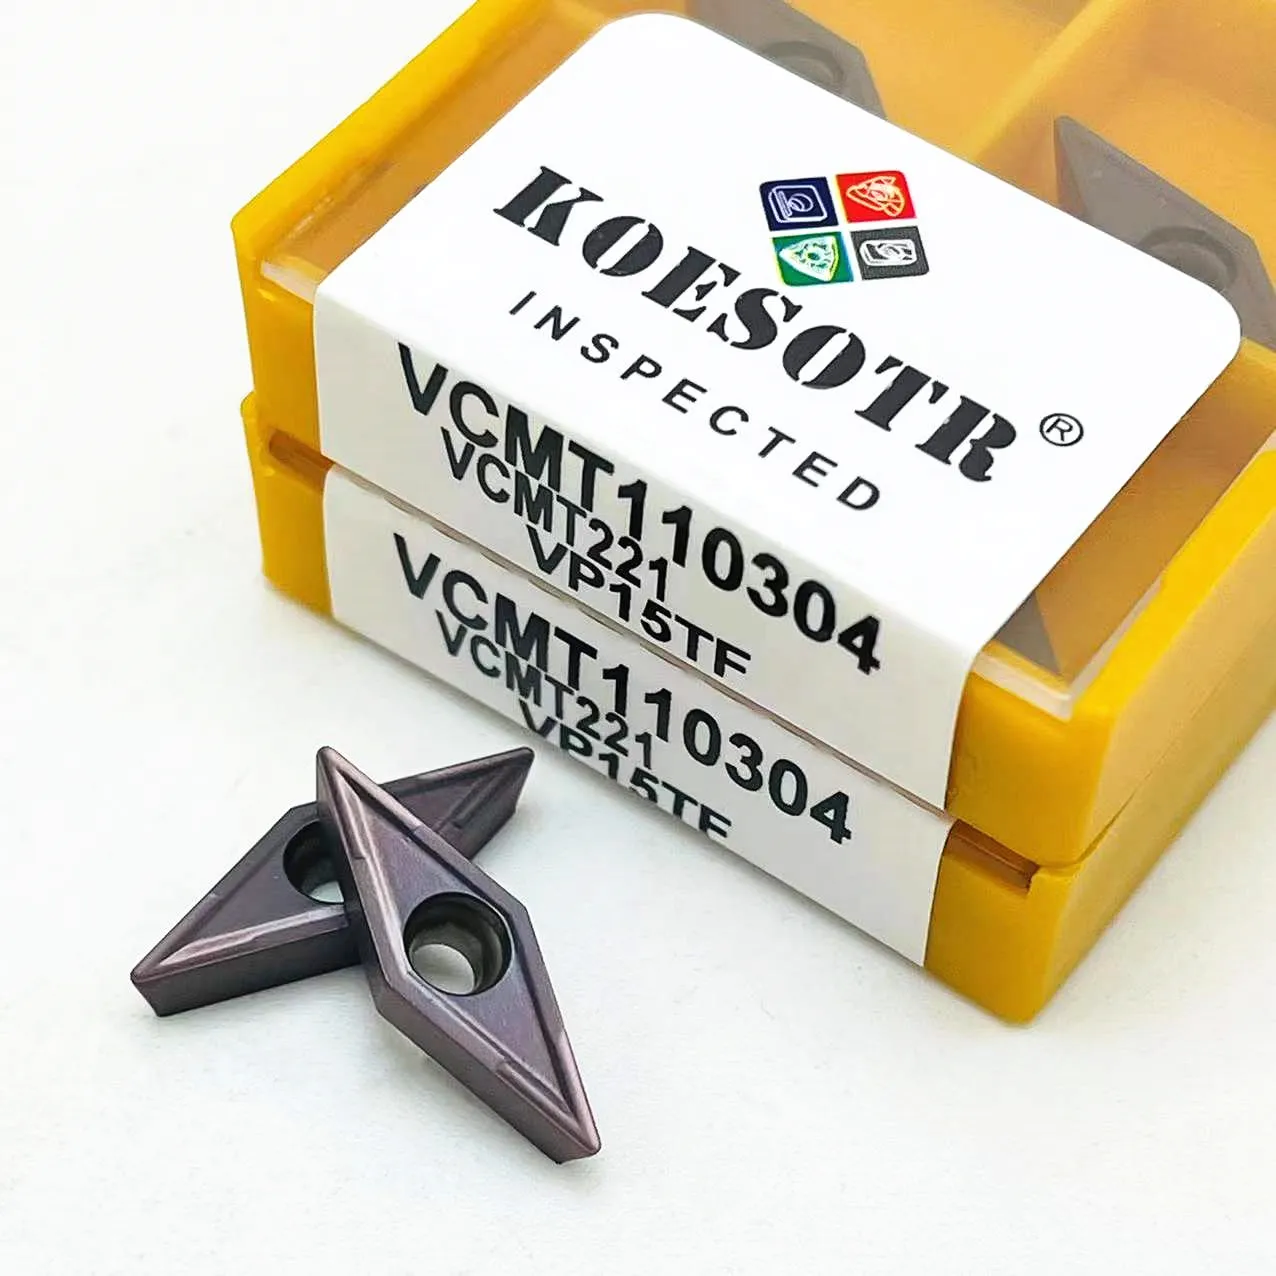 

VCMT110304 VP15TF VCMT110304 UE6020 US735 CNC turning insert machine tool turning and milling tool VCMT 110304 carbide insert